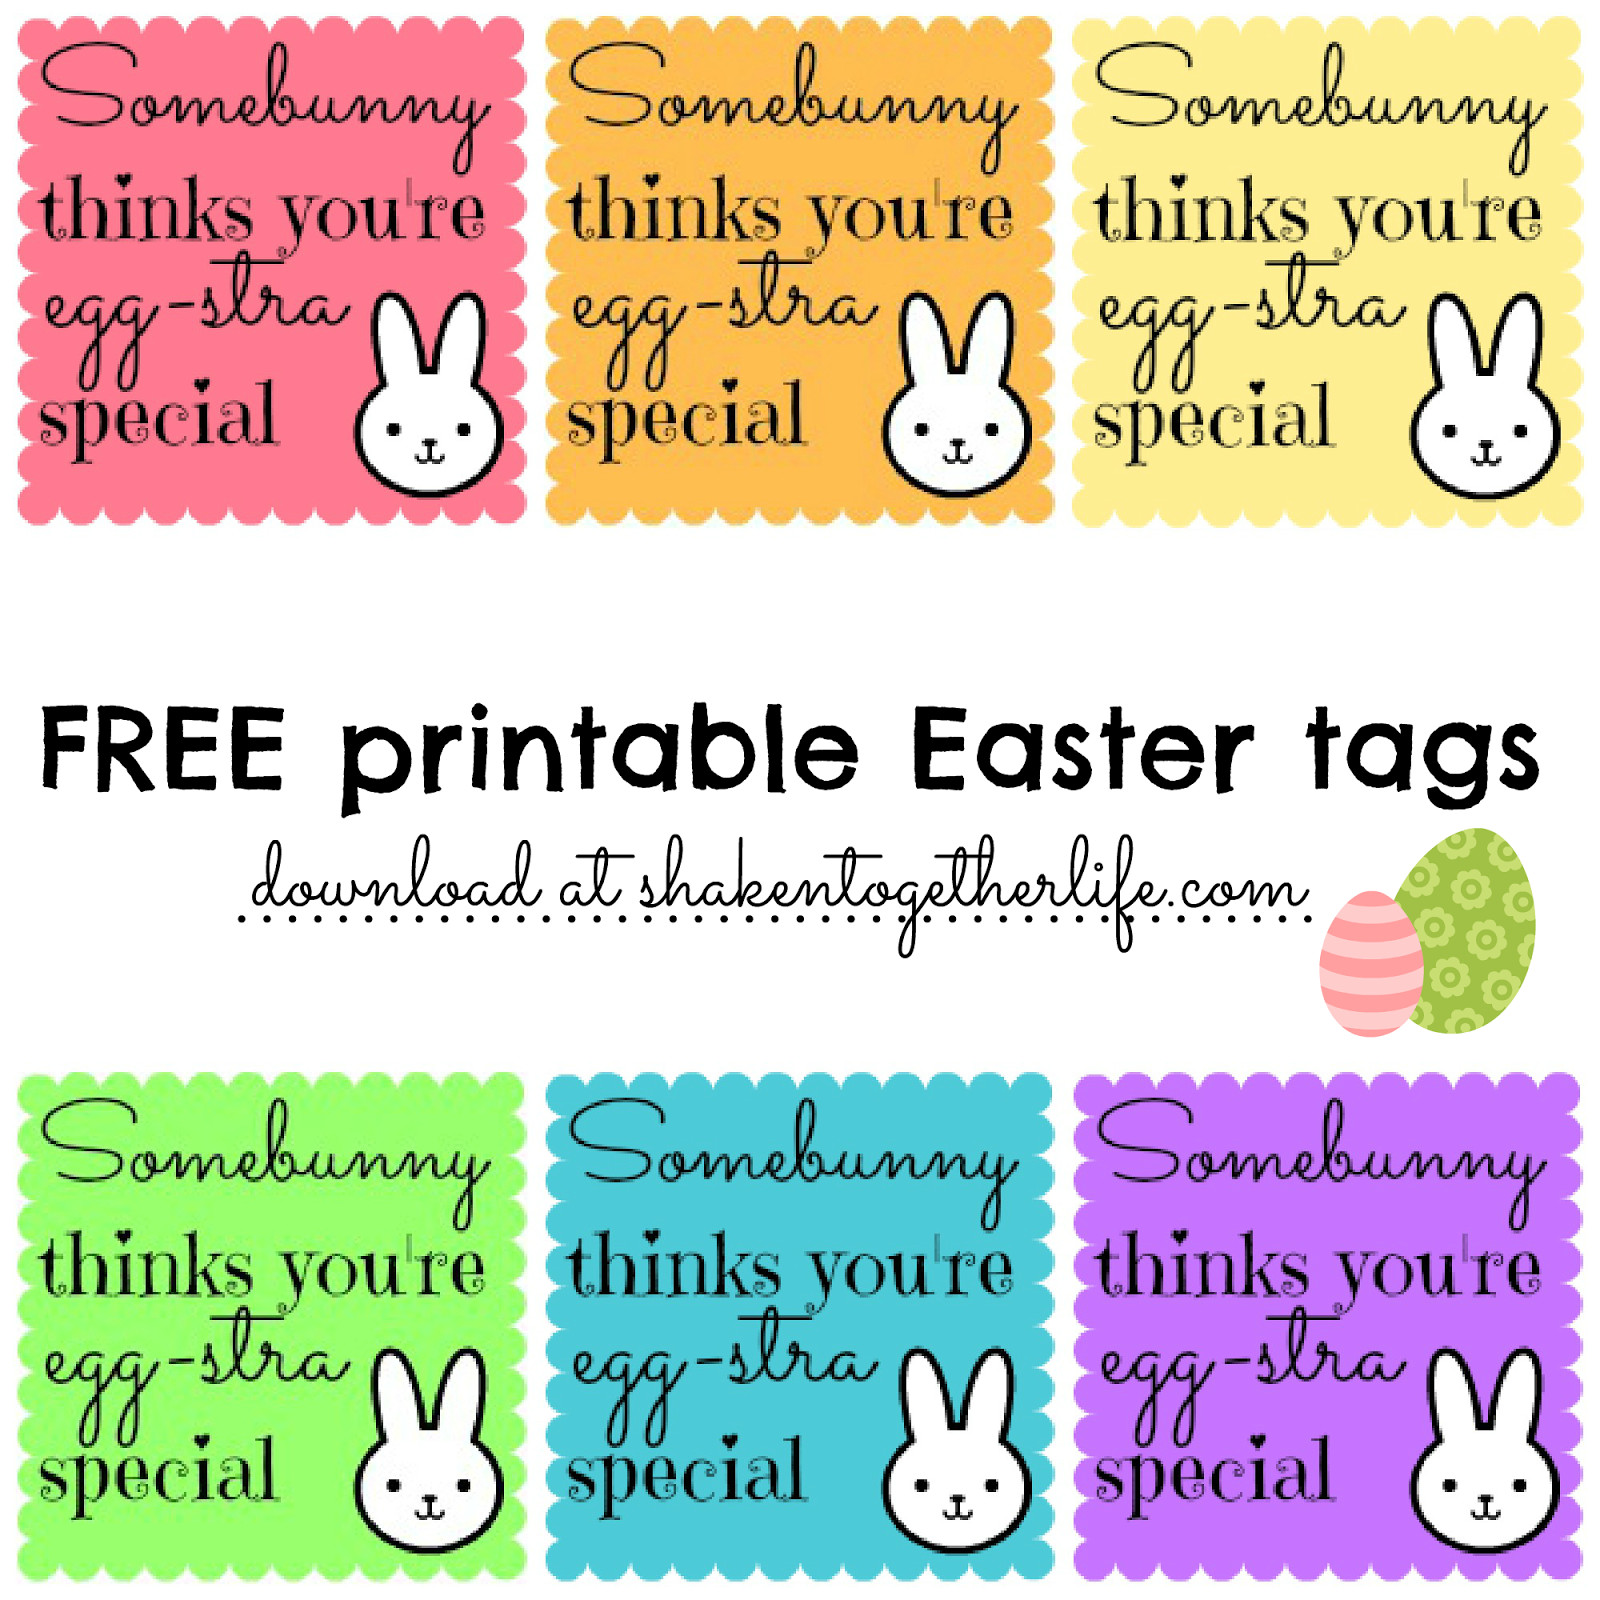 Free Printable Easter Gift Tags
 Pin by Lindsey Cruz on Easter